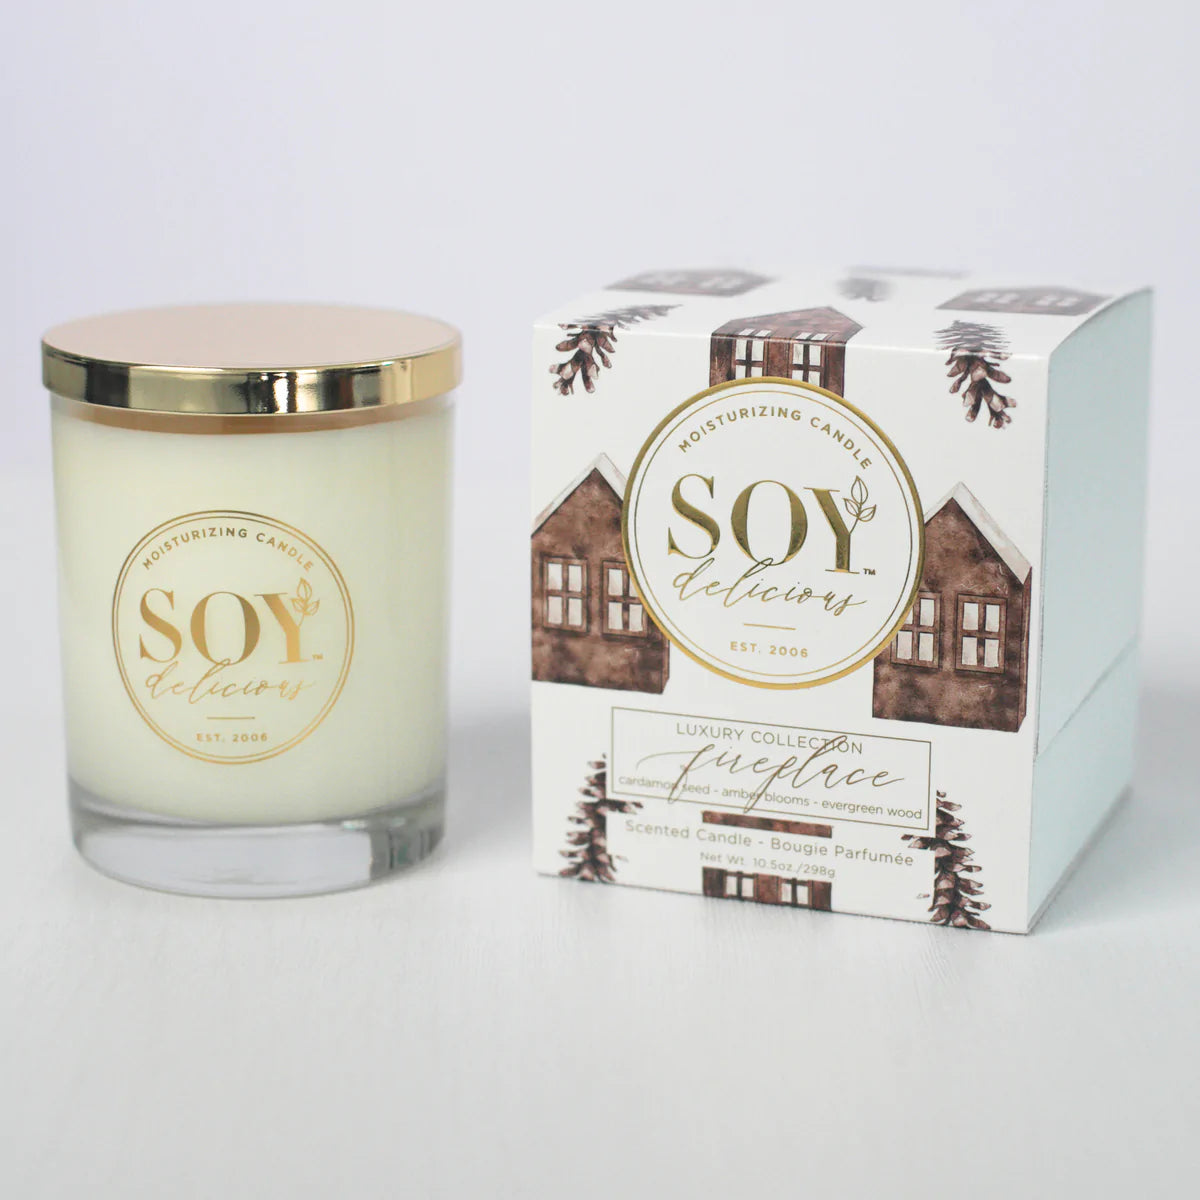 Soy Delicious Candle - Fireplace Wooden Wick